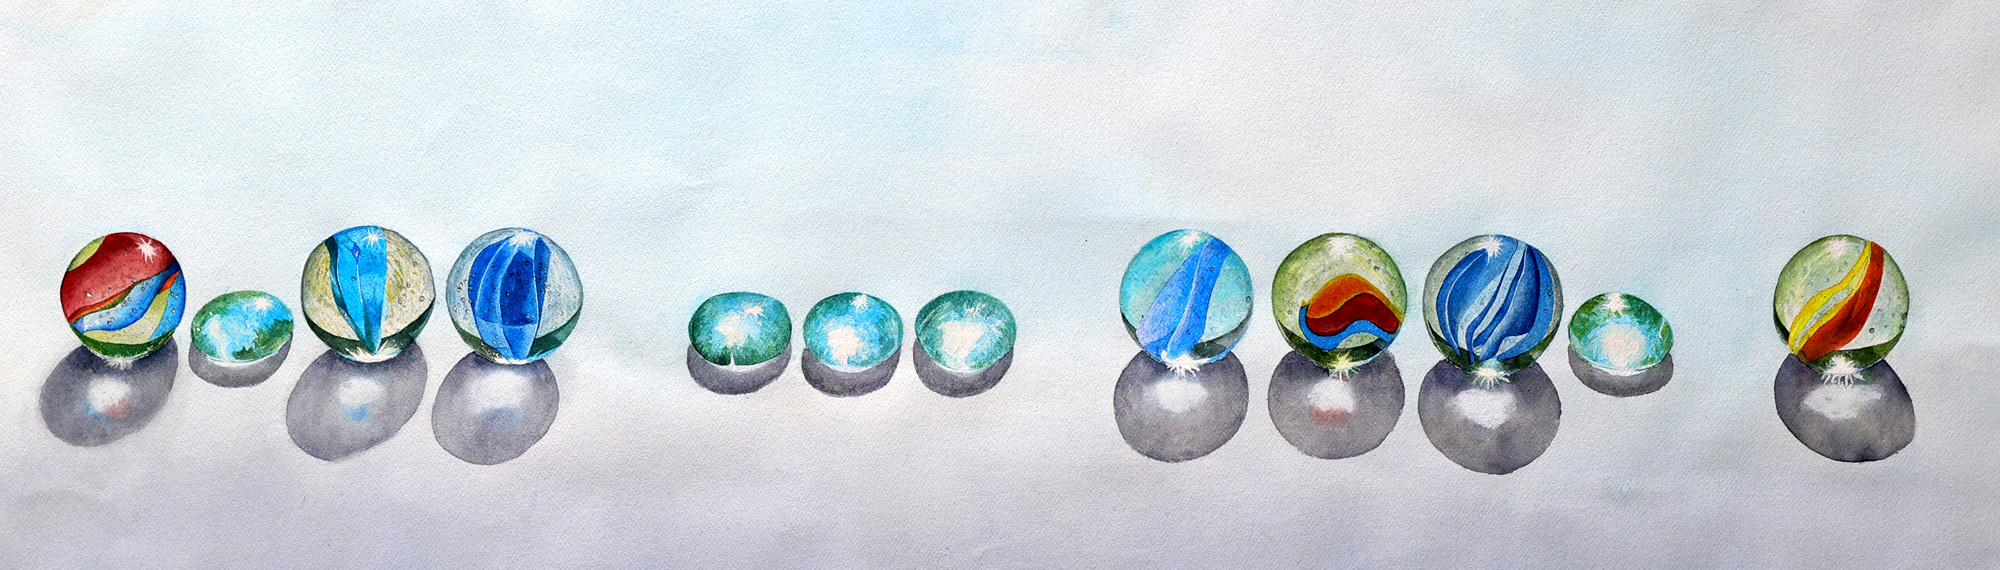 Watercolour painting by David Desormeaux of a group of marbles